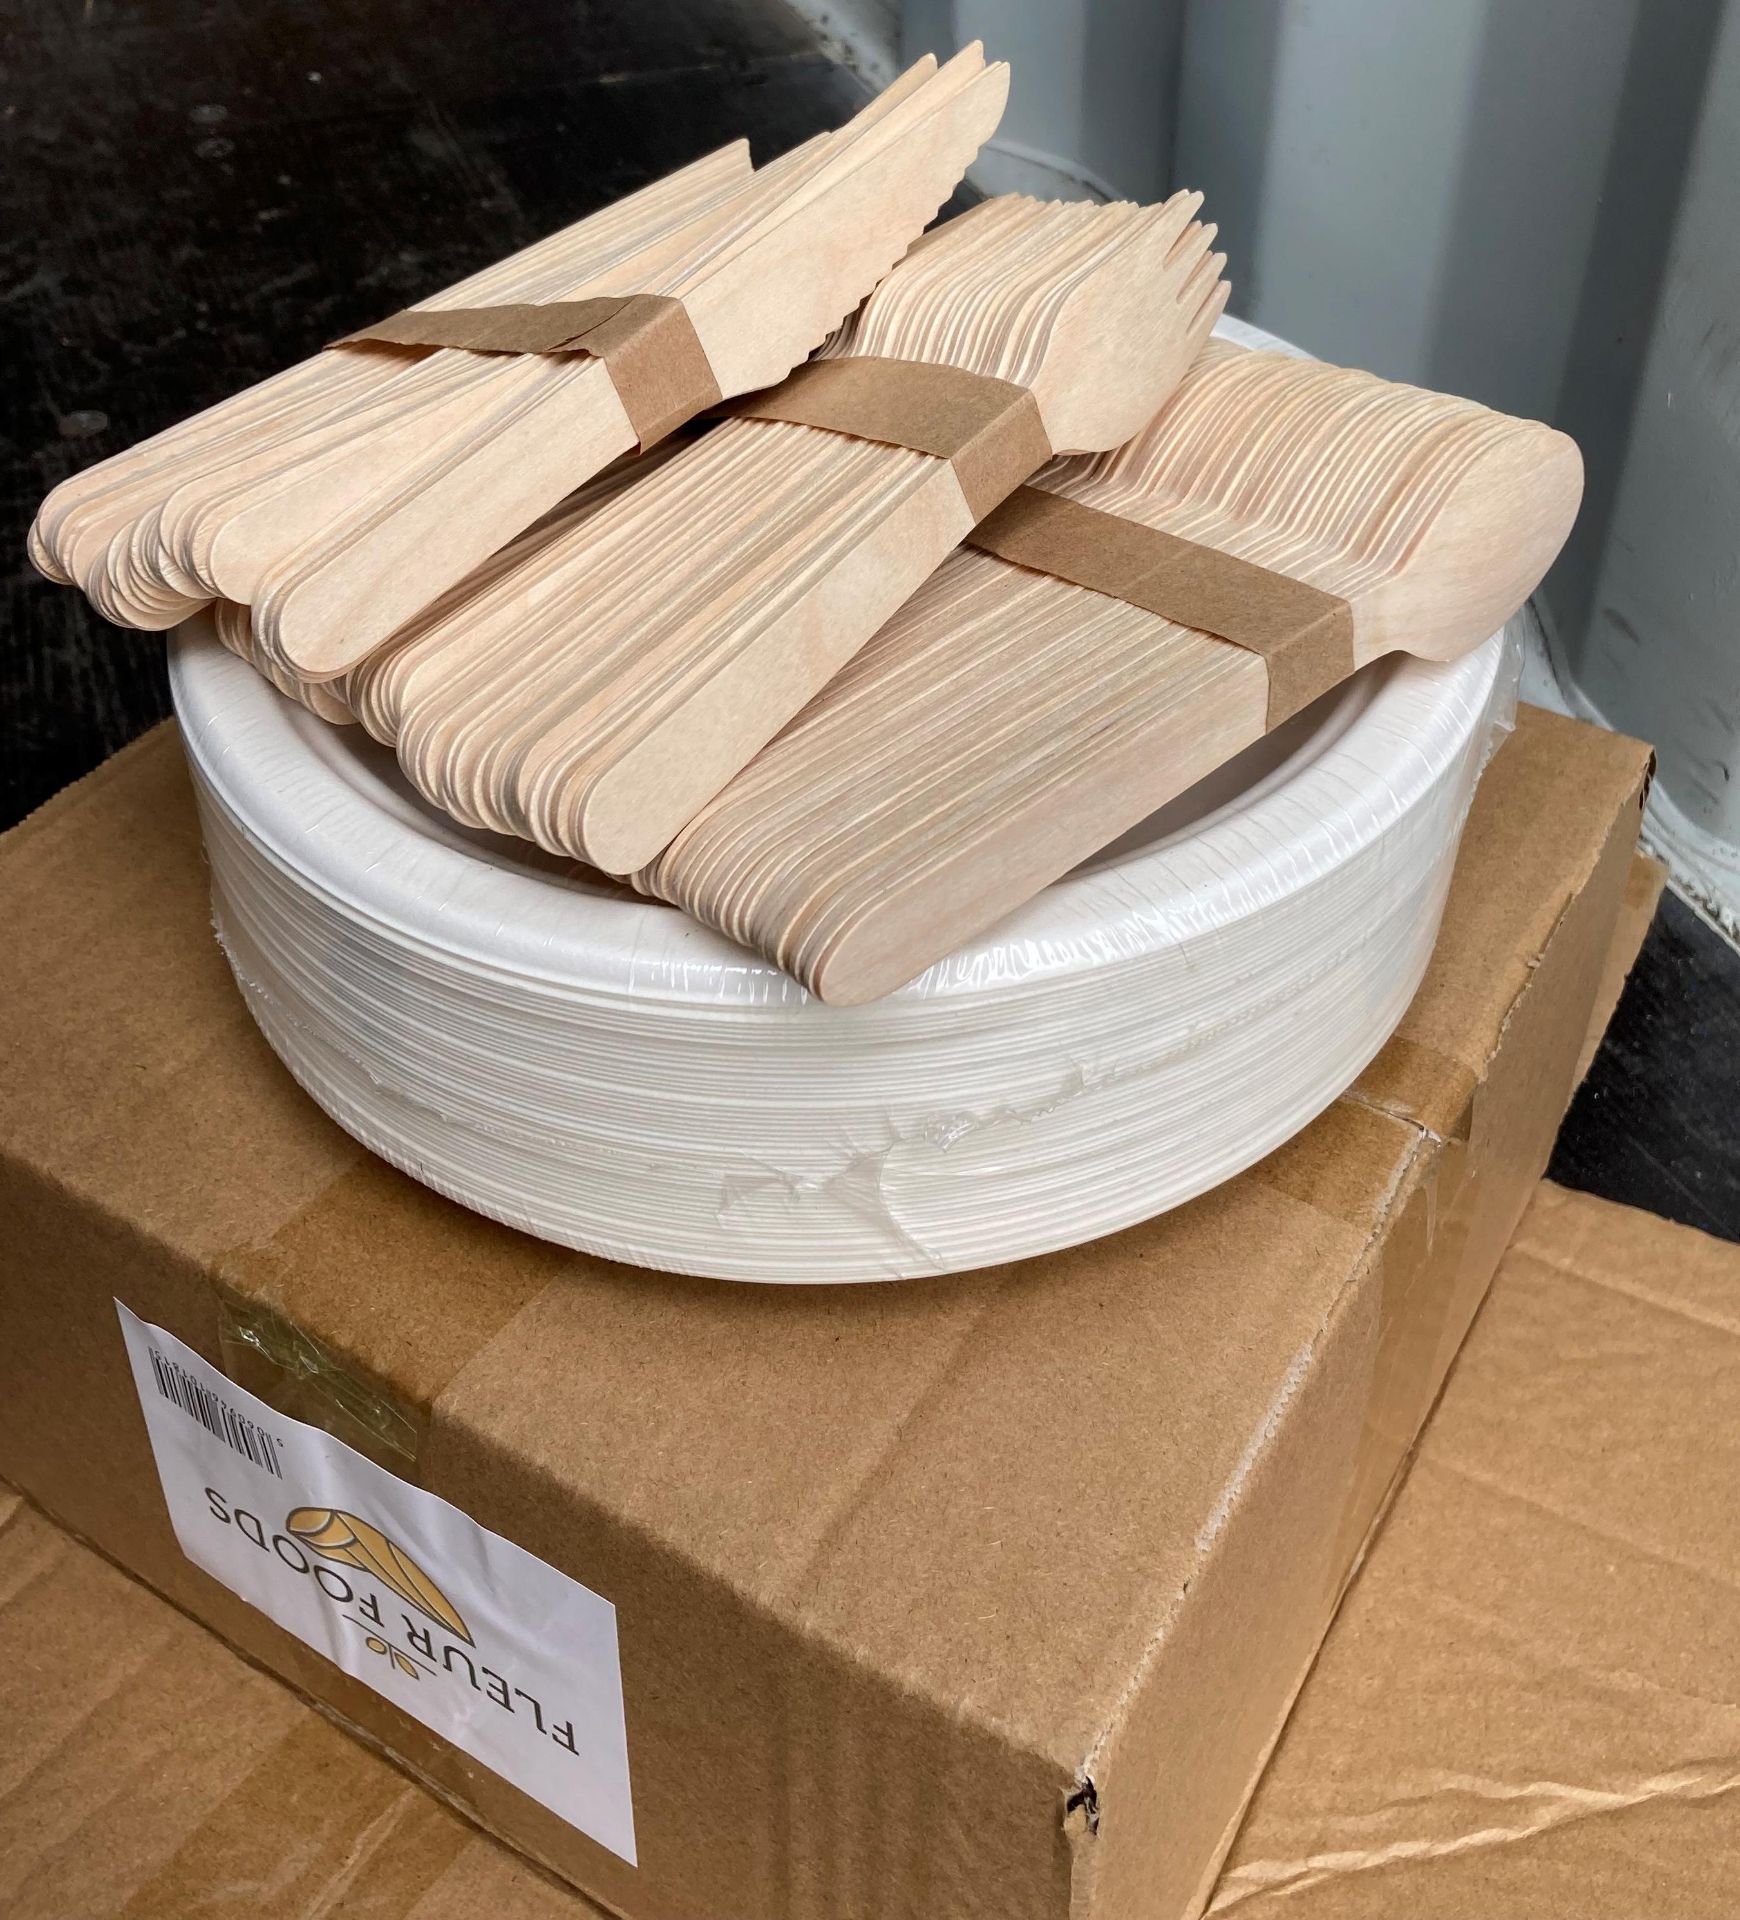 24 x packs and contents of approximately 60 x paper plates, sets of wooden knives, - Image 2 of 5